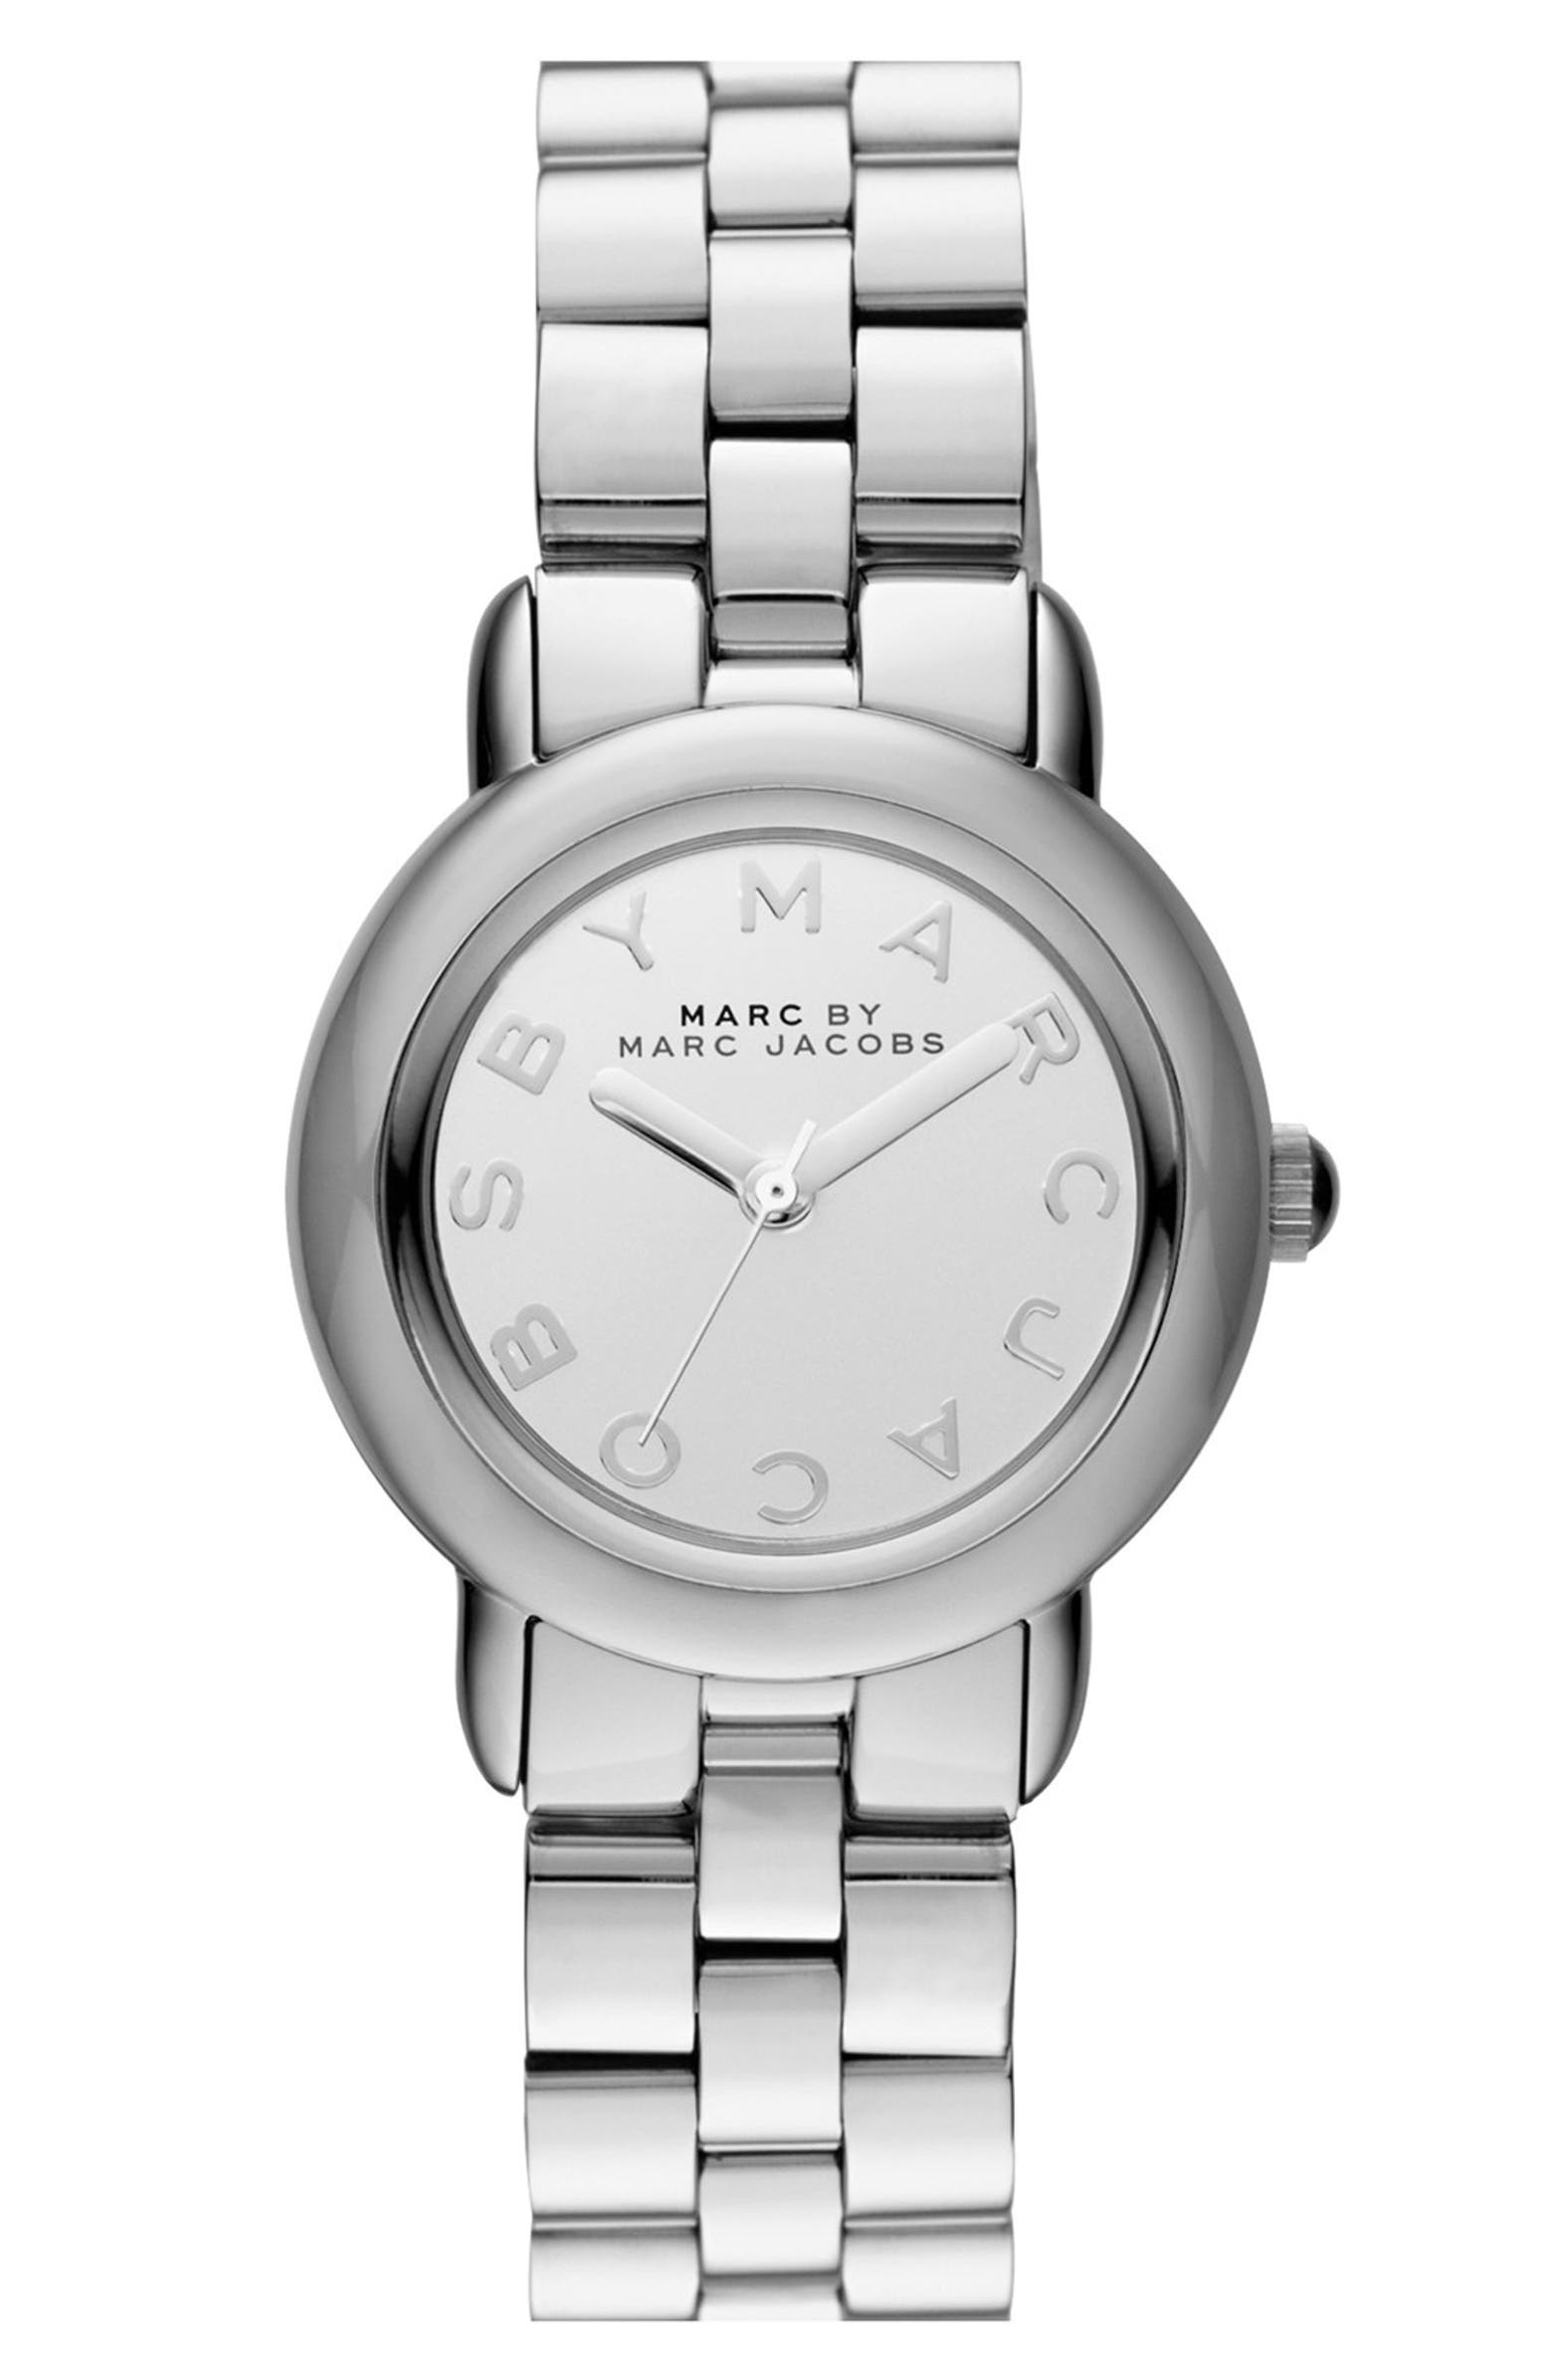 MARC BY MARC JACOBS 'Marci' Small Bracelet Watch, 30mm | Nordstrom